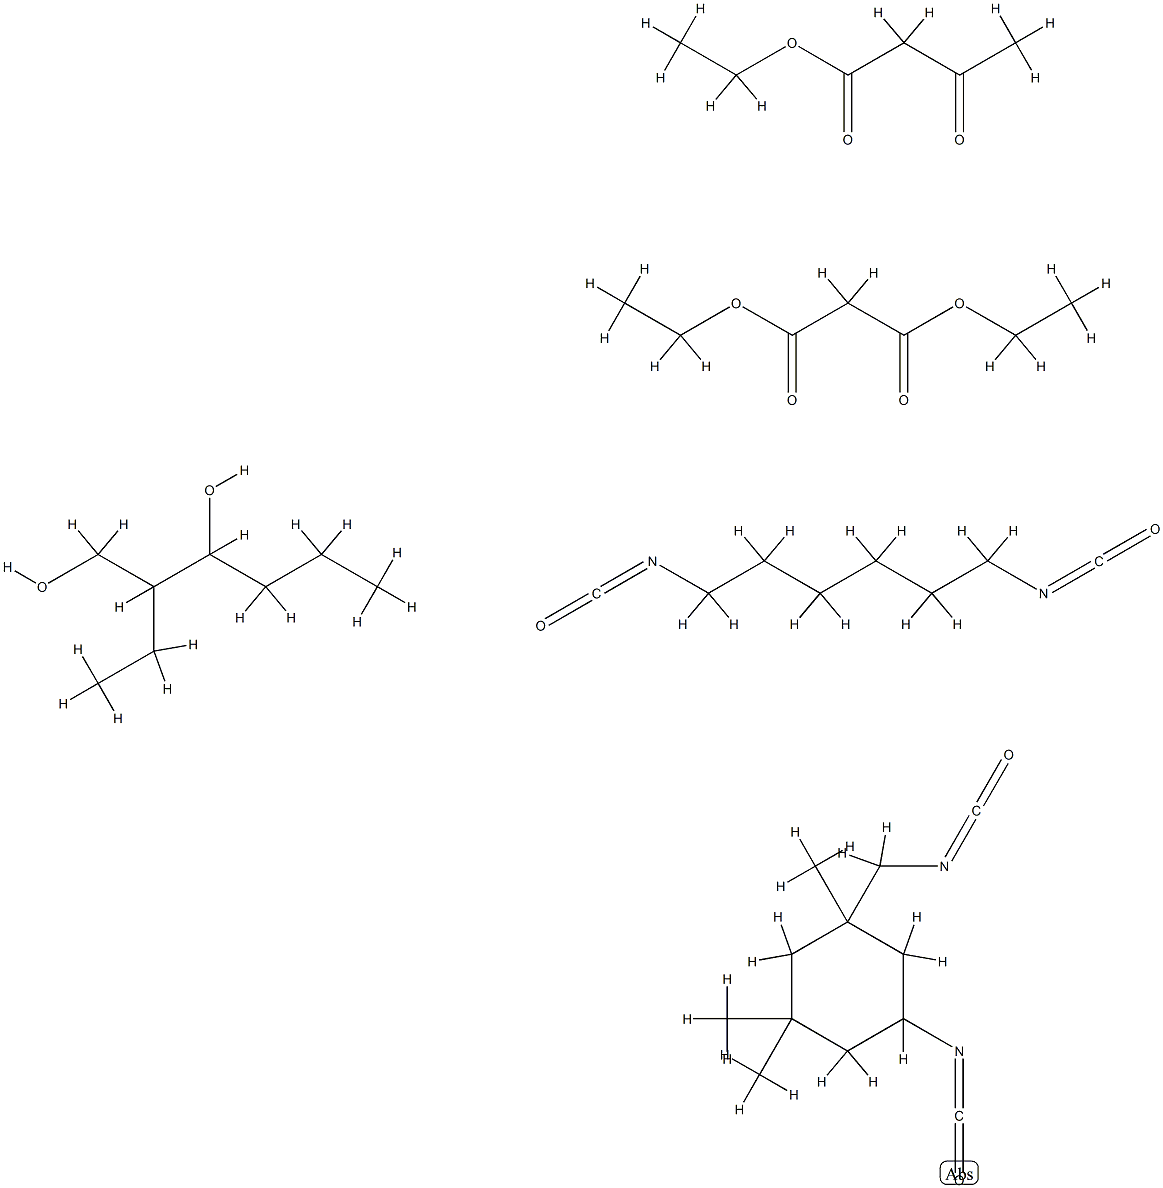 Propanedioic acid, diethyl ester, reaction products with 1,6-diisocyanatohexane homopolymer, ethyl acetoacetate, 2-ethyl-1,3-hexanediol and 5-isocyanato-1-(isocyanatomethyl) -1,3,3-trimethylcyclohexane homopolymer|